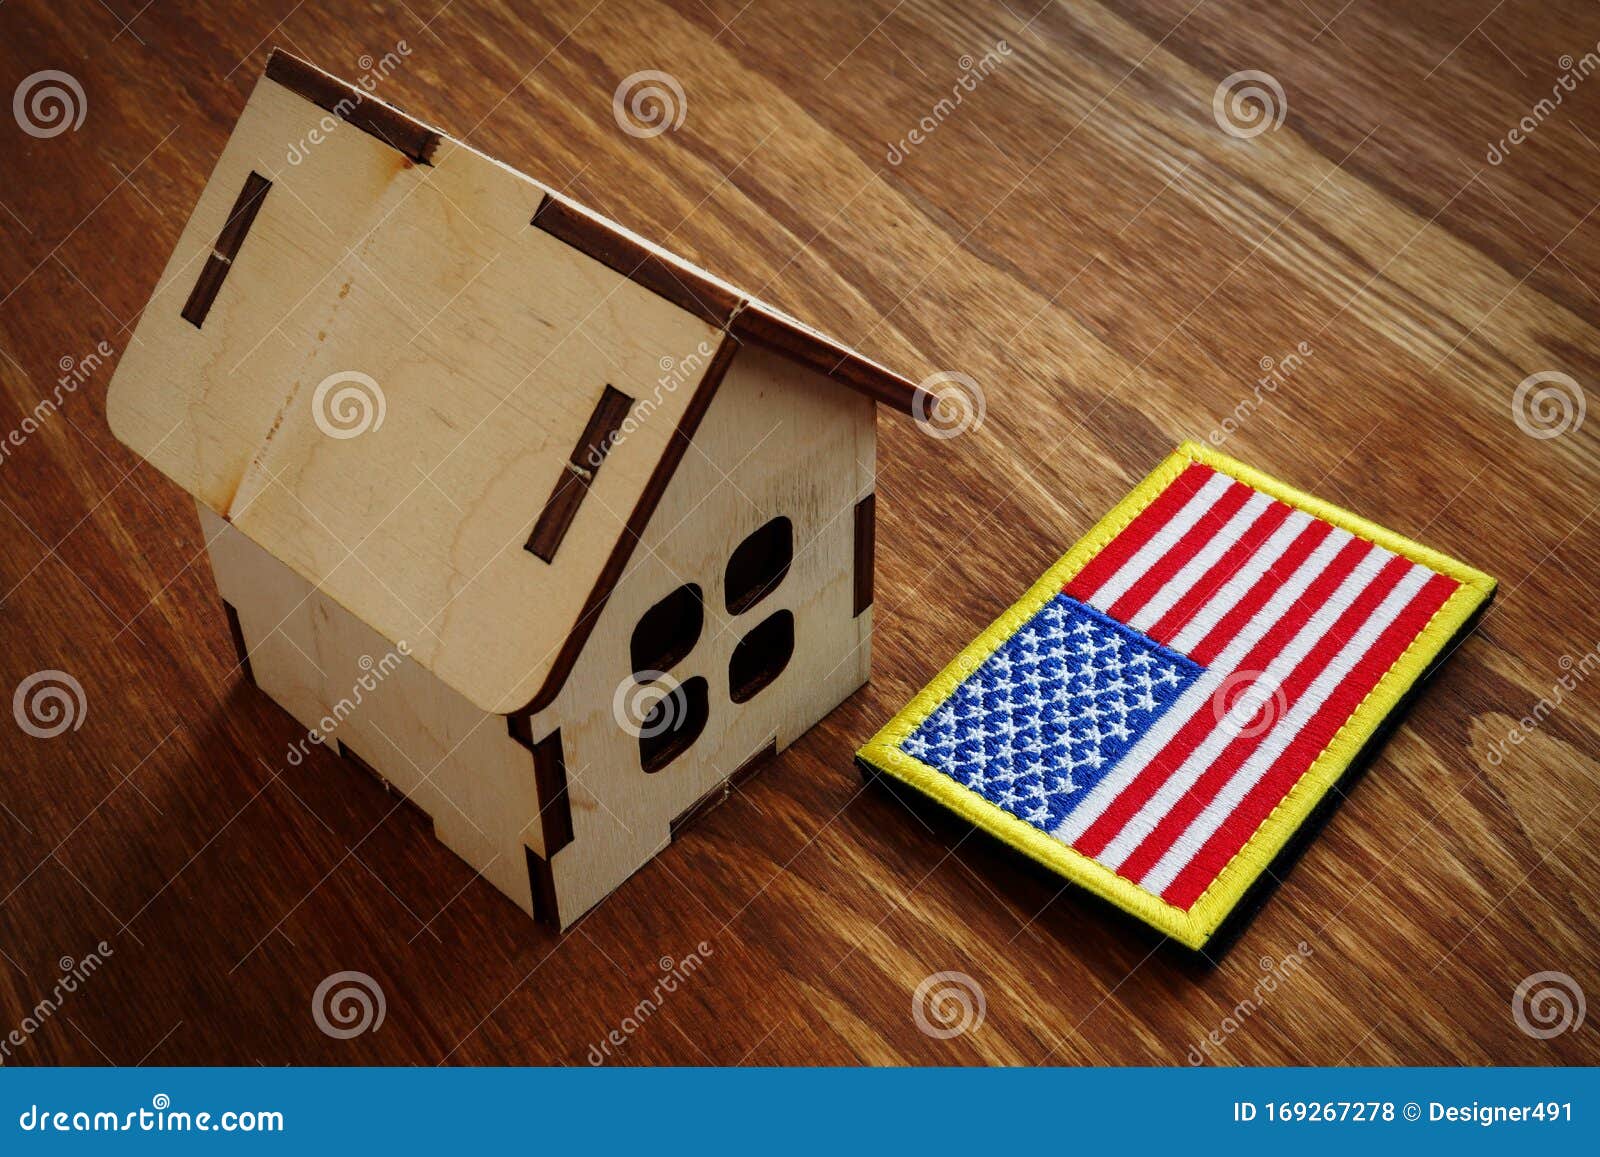 american flag and small house. va mortgage loan concept